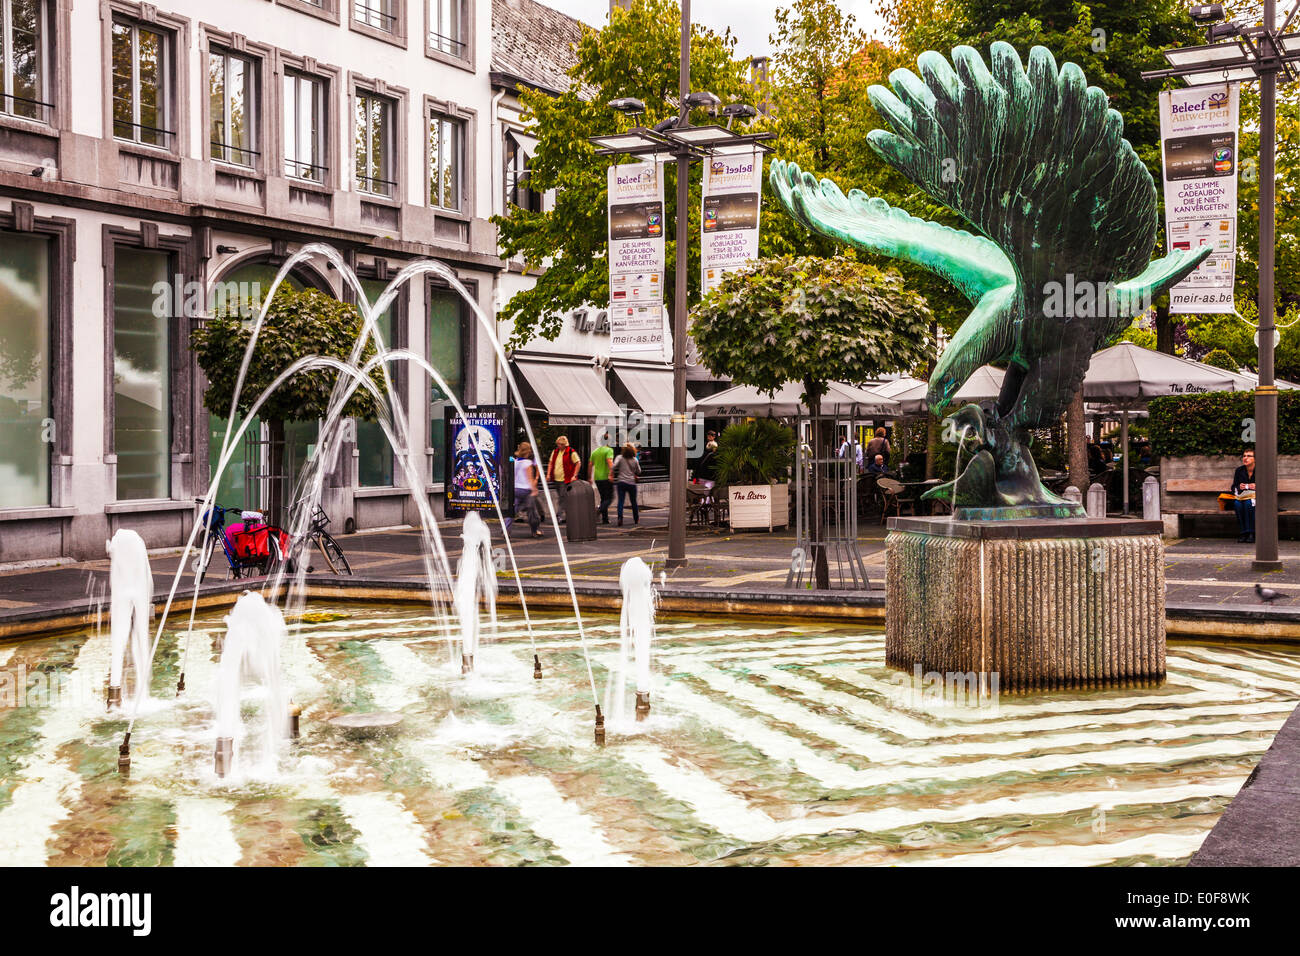 Fountain in the main pedesrtianised shopping street of Meir in Antwerp, Belgium. Stock Photo